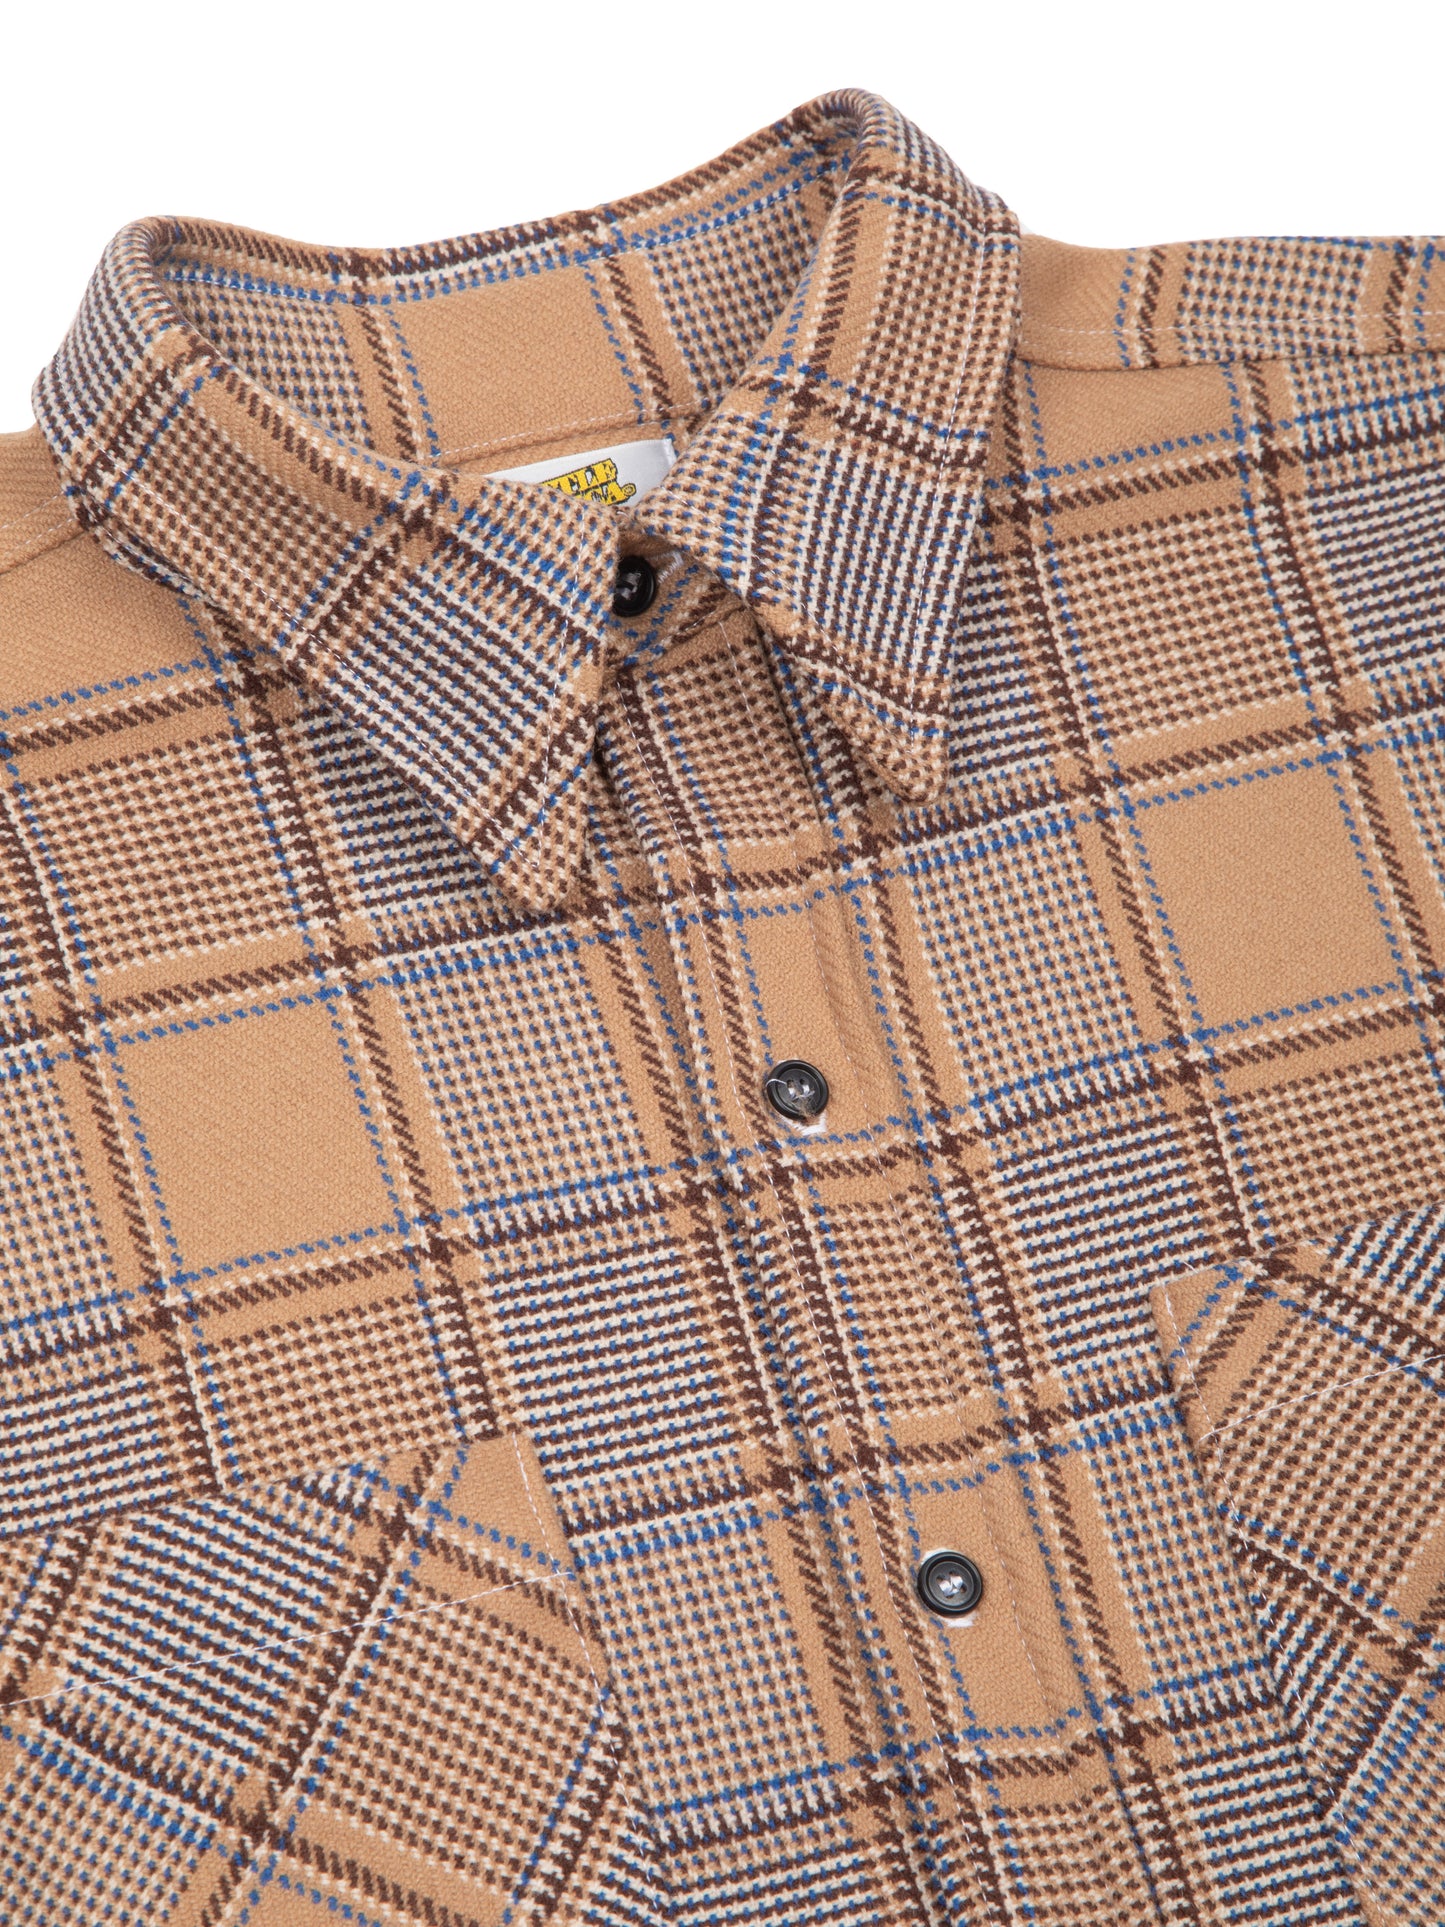 LITTLE AFRICA "Old Head Flannel" (Taupe/Brown/White/Blue)